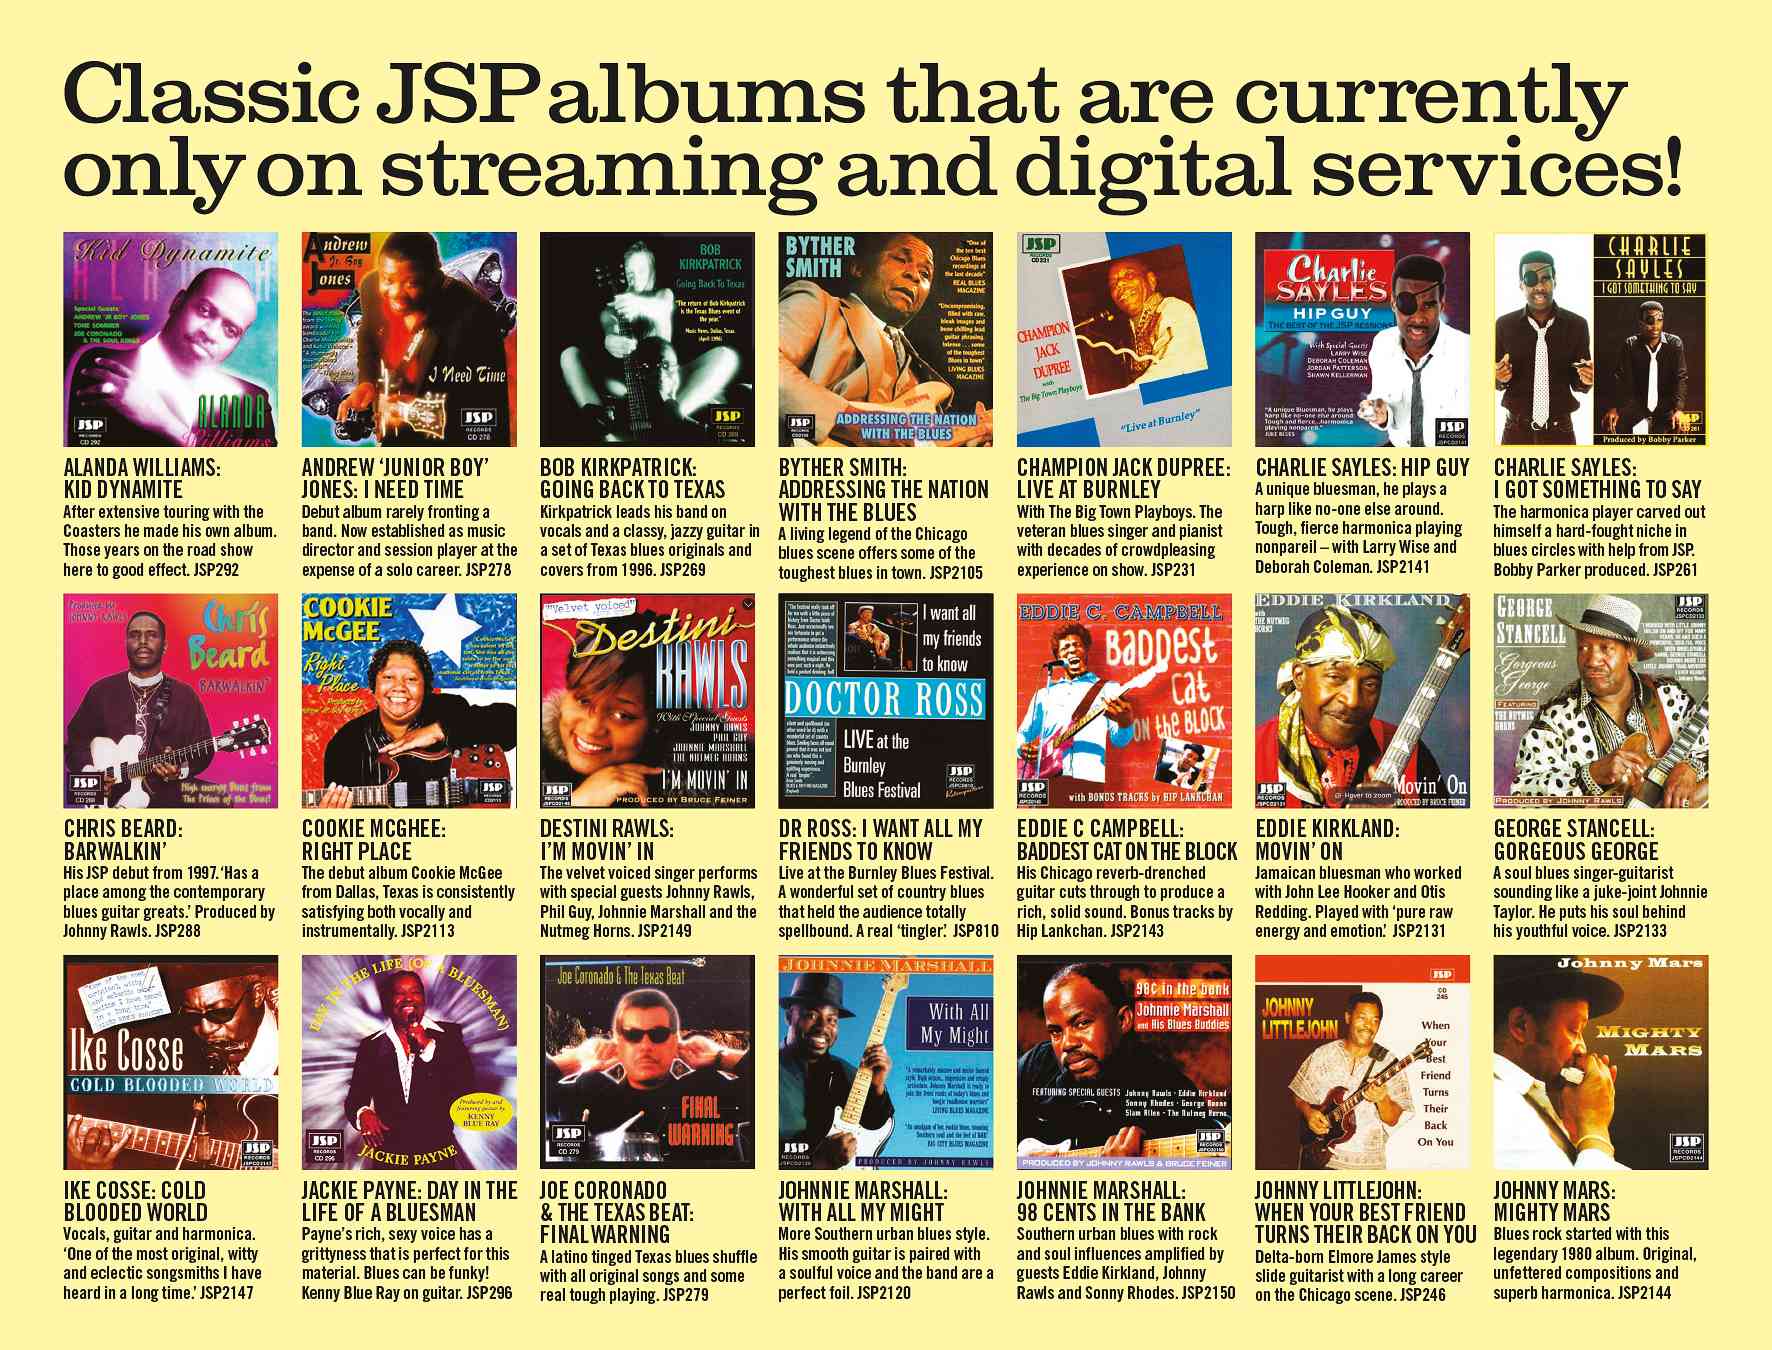 Classic JSP Albums That Are Currently Only On Streaming and Digital Services